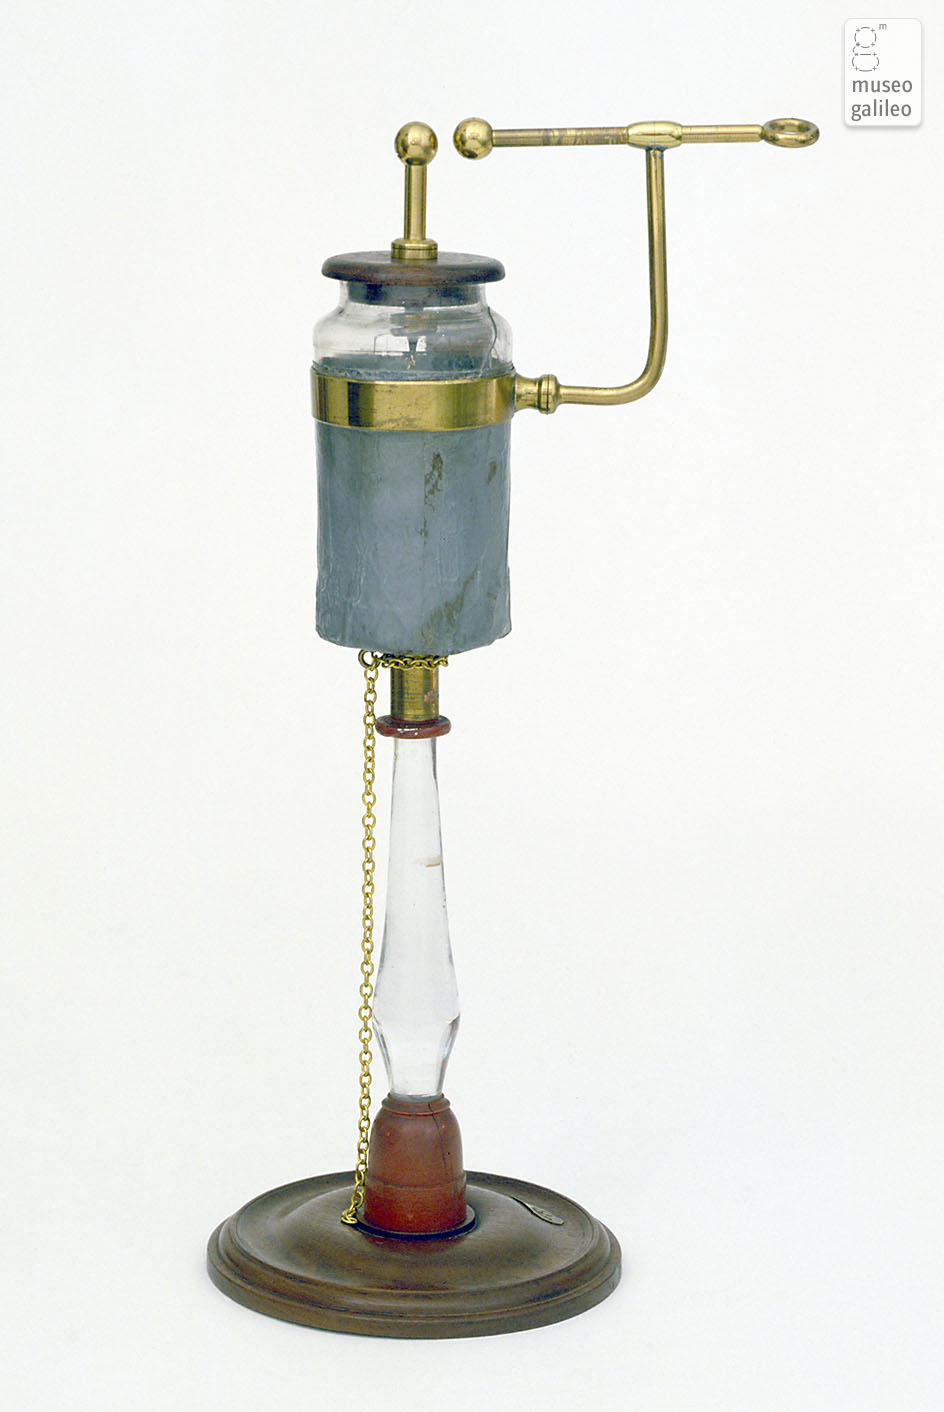 Lane electrometer and Leyden jar on insulated support (Inv. 1326)